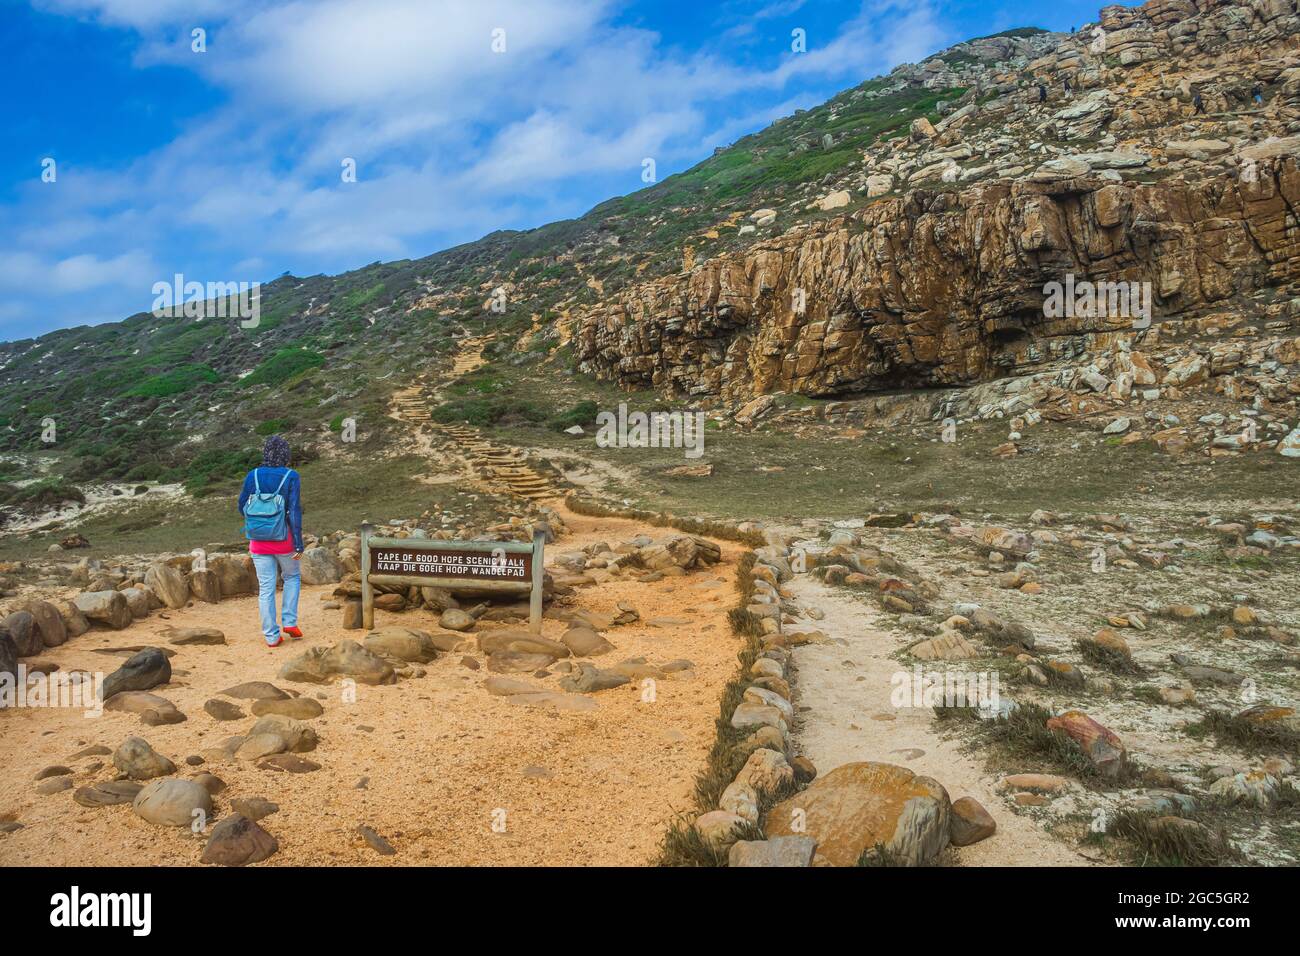 A woman at the trail of Cape of Good Hope scenic walk in Cape Point National Park, South Africa. Stock Photo